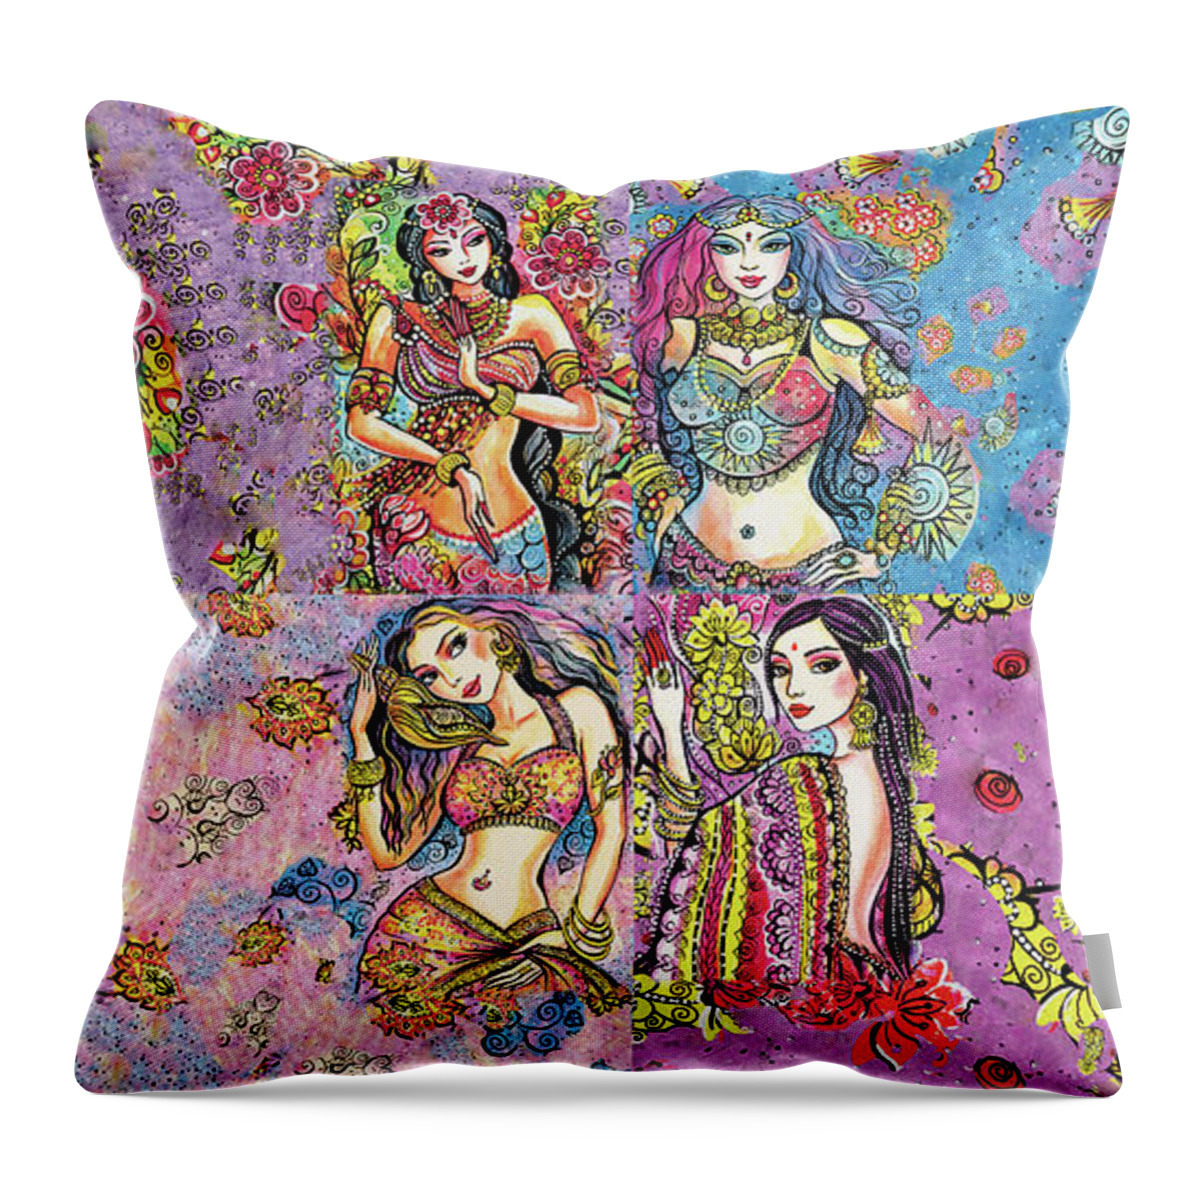 Bollywood Dancer Throw Pillow featuring the painting Eastern Flower by Eva Campbell